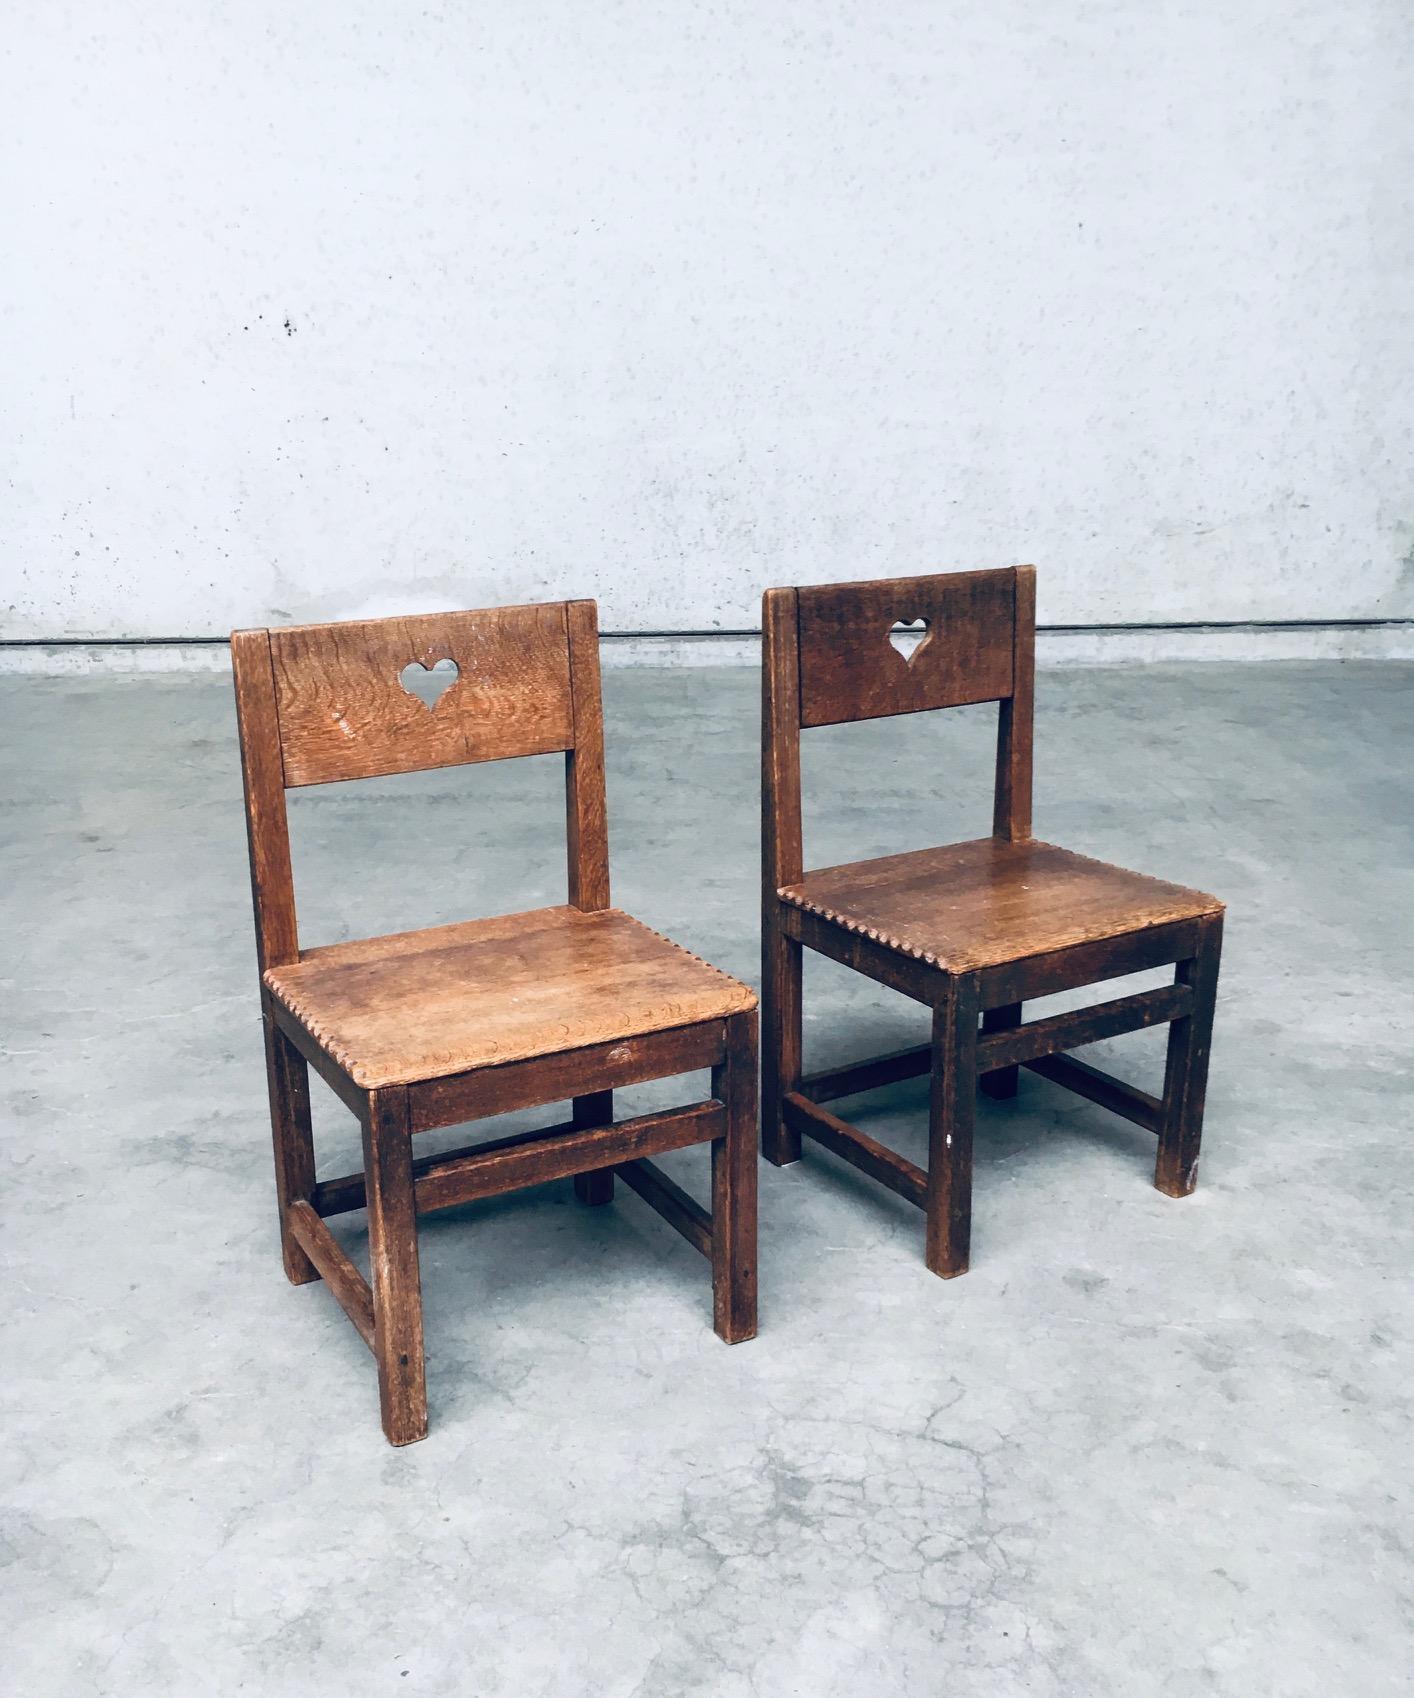 Vintage Folk Art Populaire Haagsche School Design Style Child Chair set. Made in the Netherlands, 1910's / 20's. Handmade and carved oak child chairs with a heart carved in the backrest and nice carvings at the edge of the seat. Beautiful in their